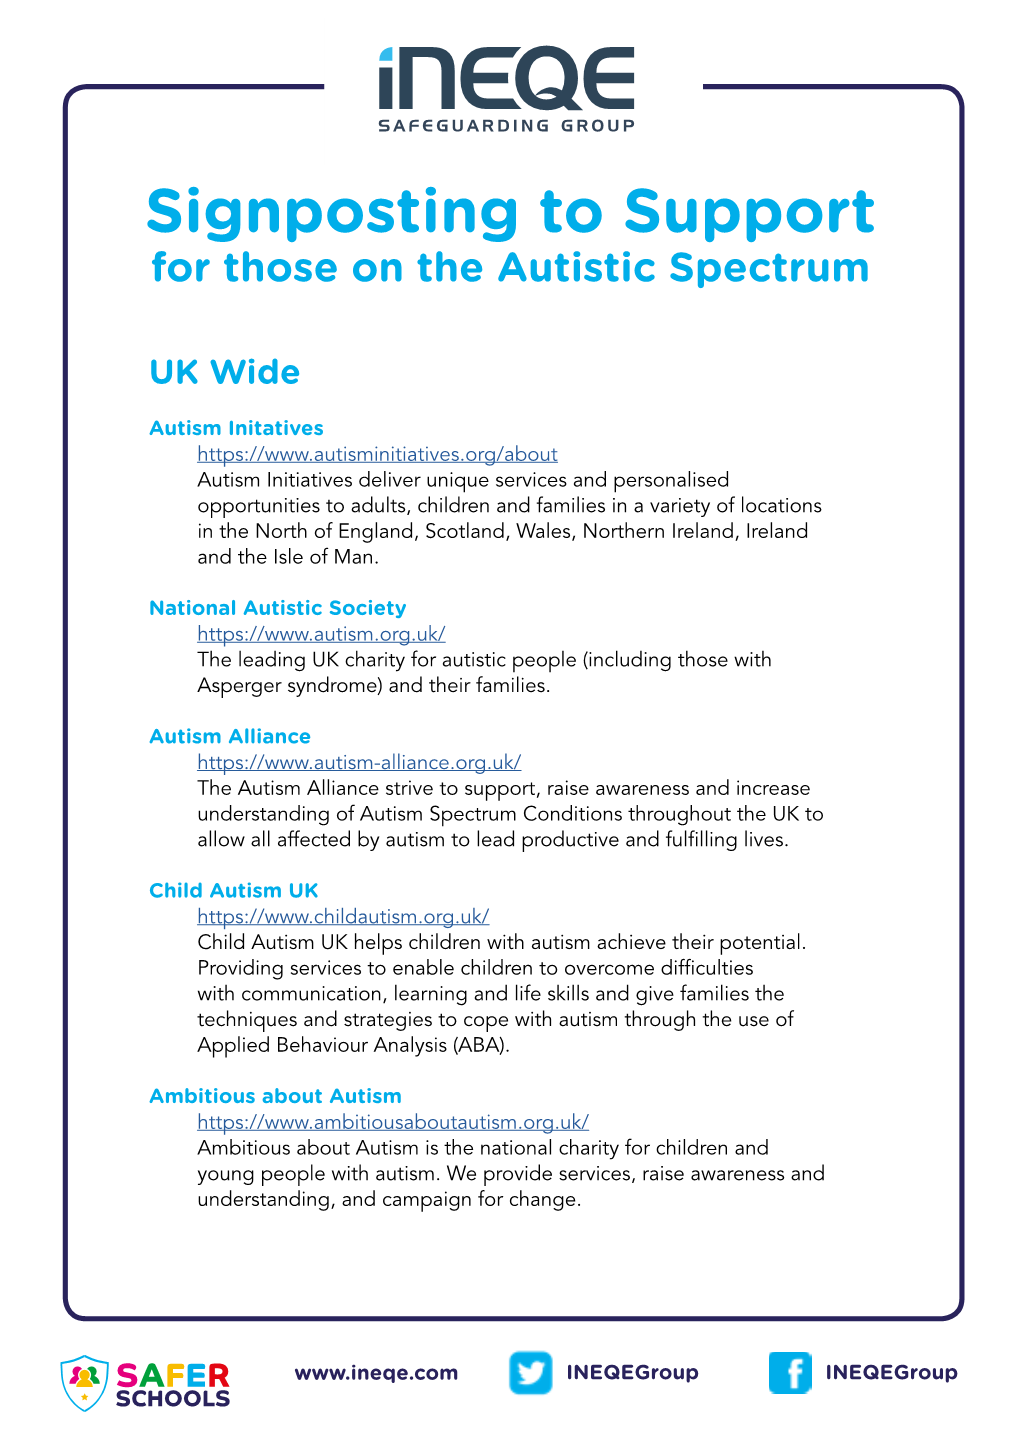 Signposting to Support for Those on the Autistic Spectrum